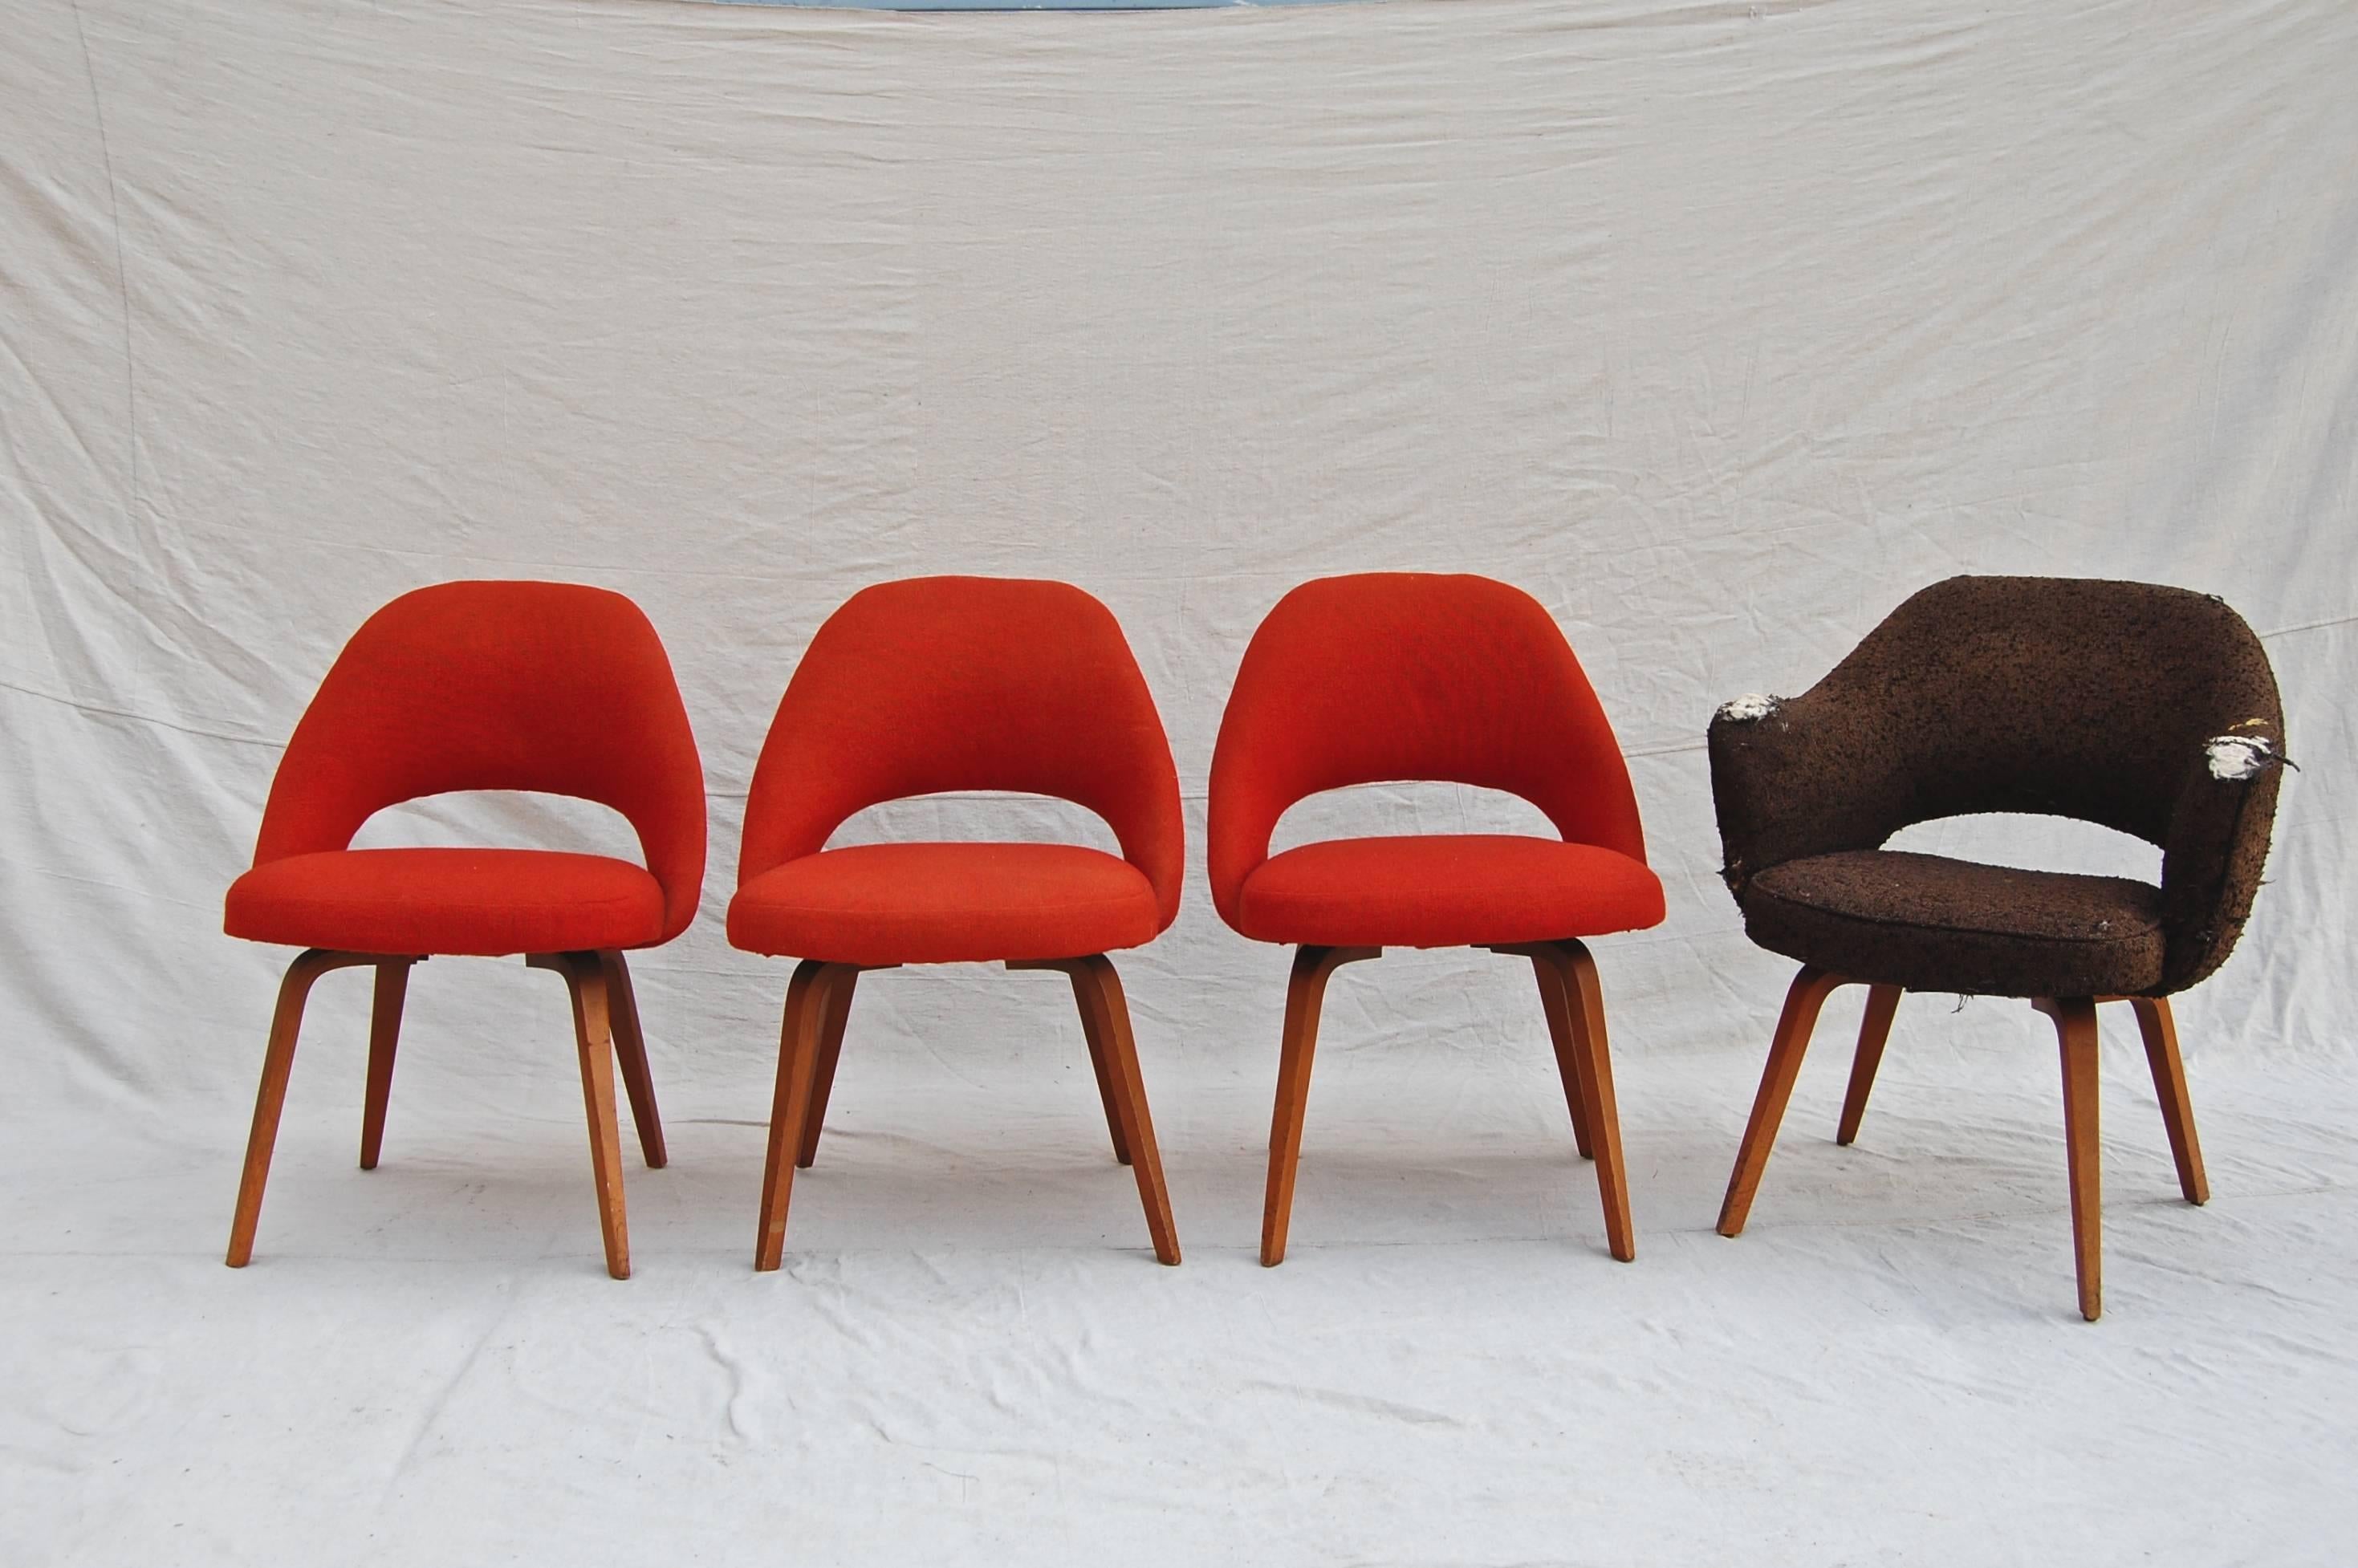 Upholstery Set of Ten Saarinen for Knoll Executive/ Dining Chairs, Wood Legs